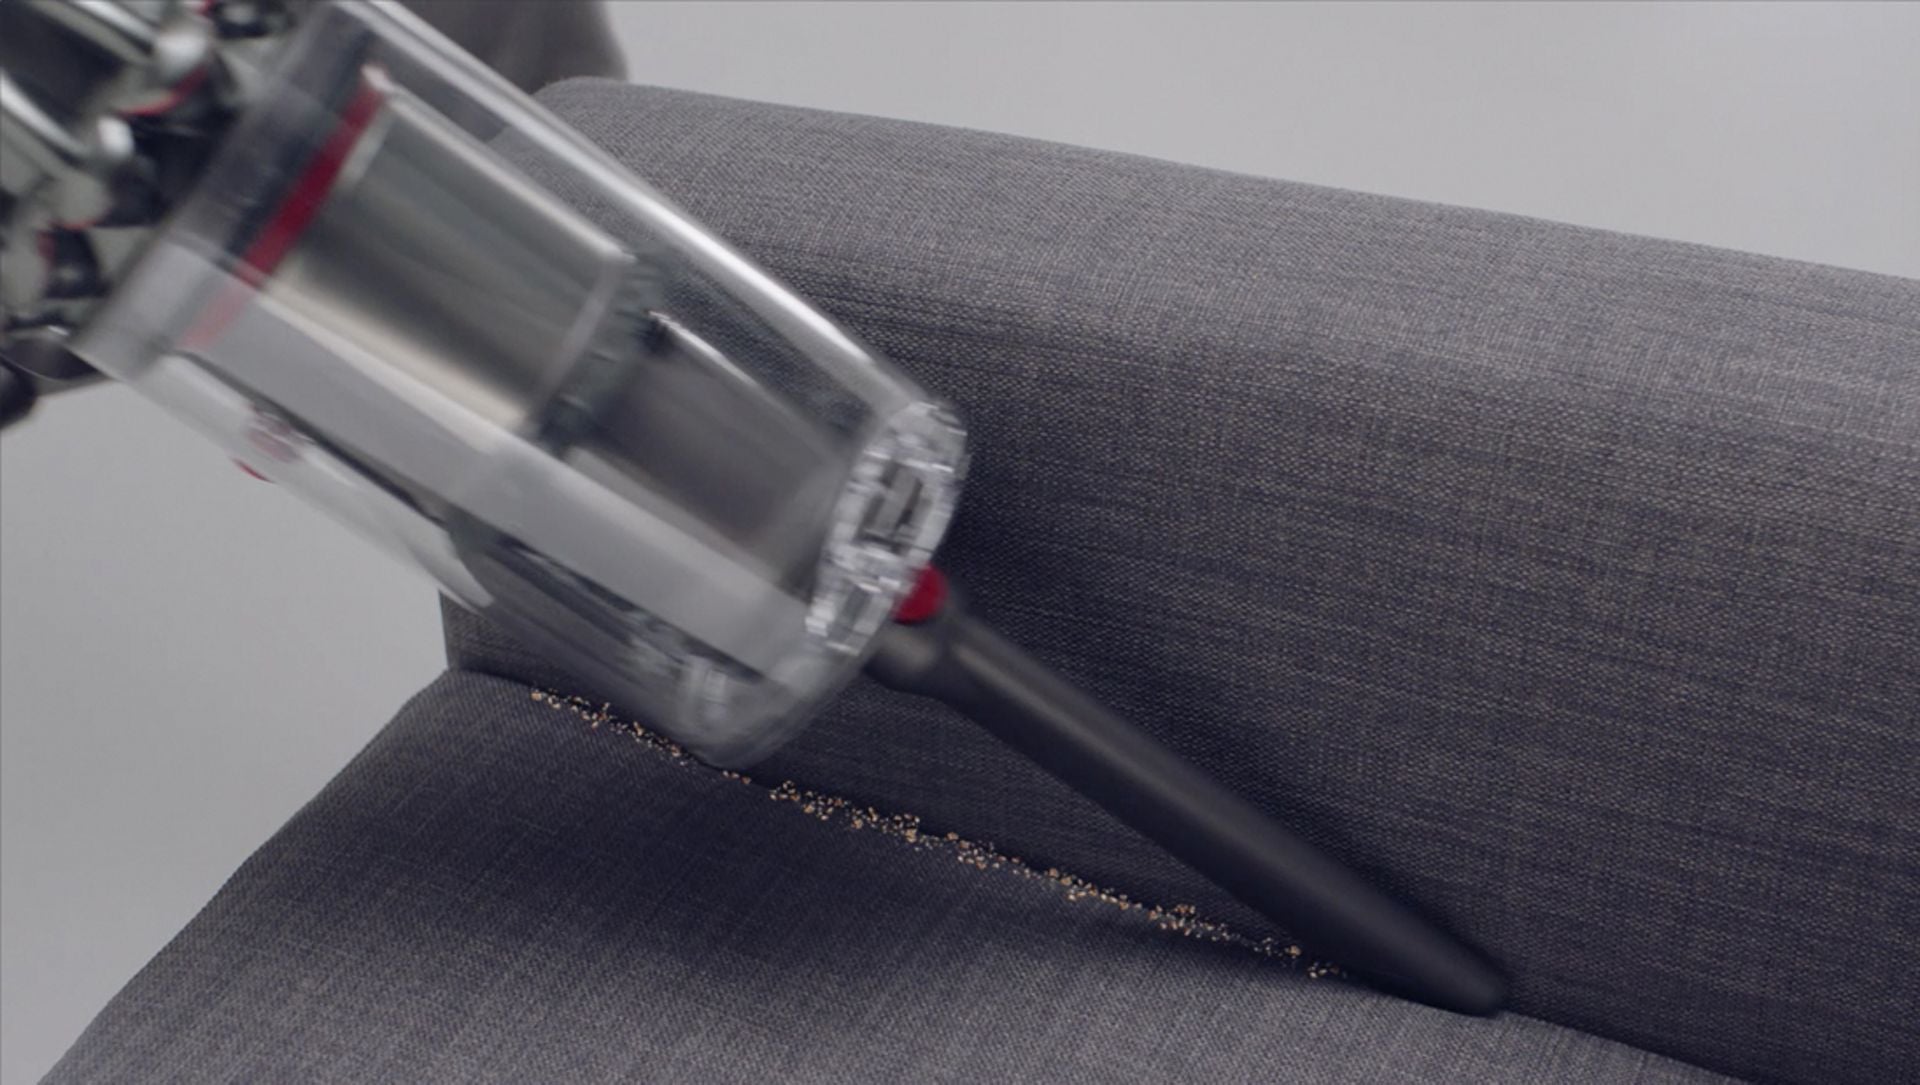 Dyson V11 Absolute